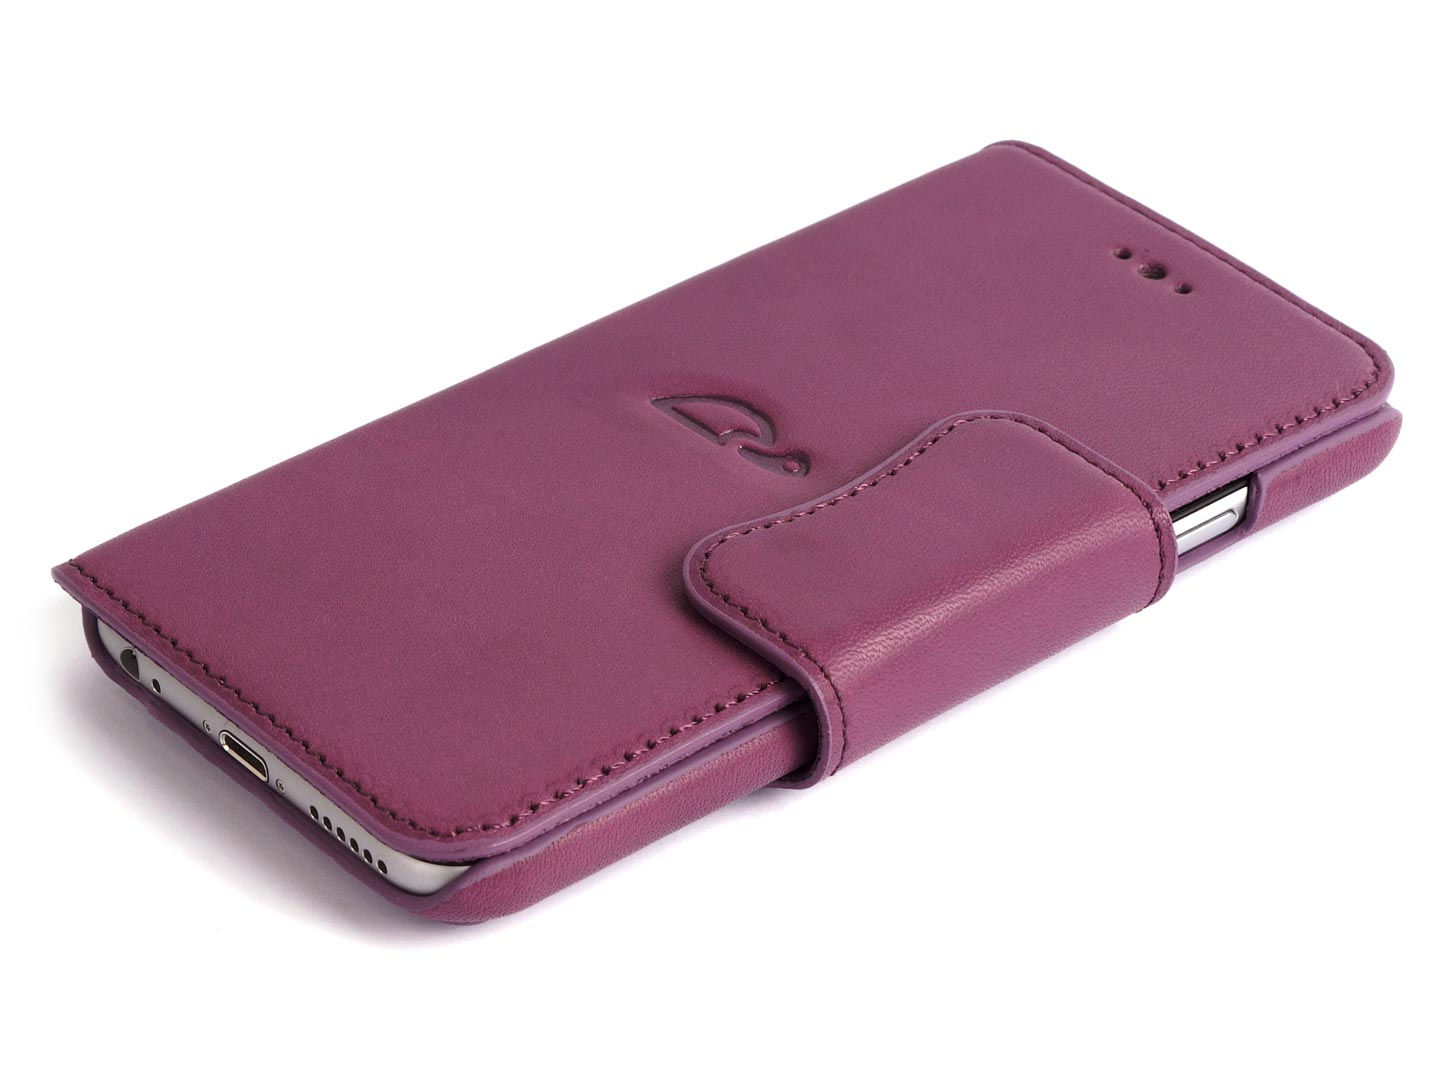 iPhone 6 case purple leather - wallet - Carapaz